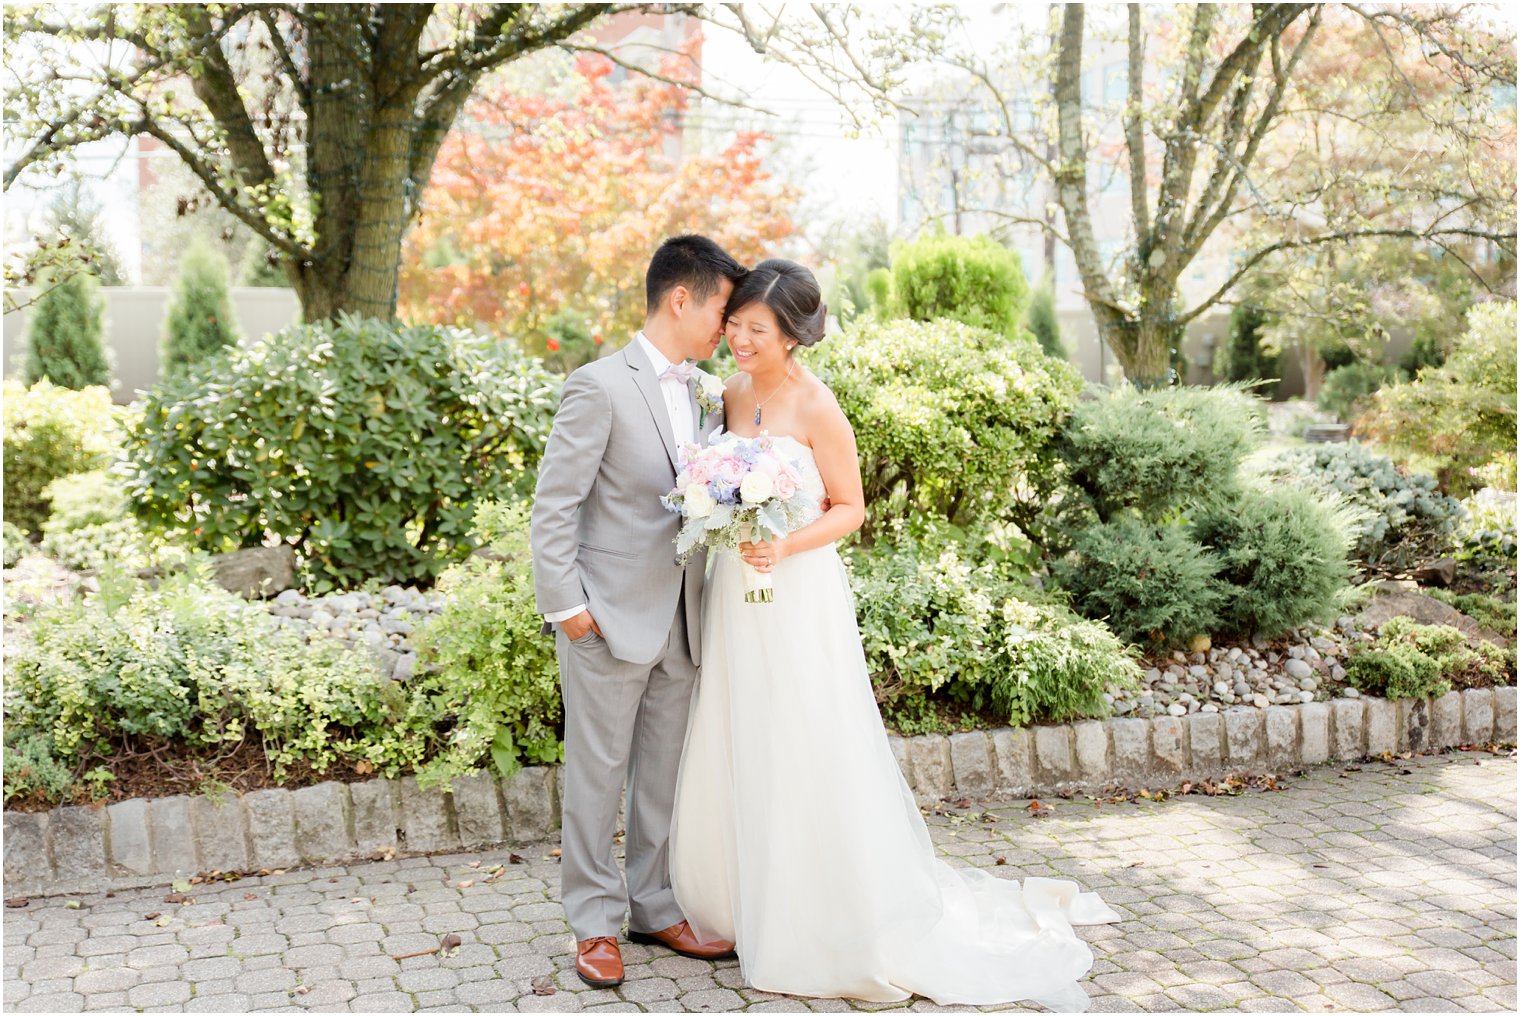 Groom nuzzles new bride at The Bethwood in New Jersey photographed by Idalia Photography